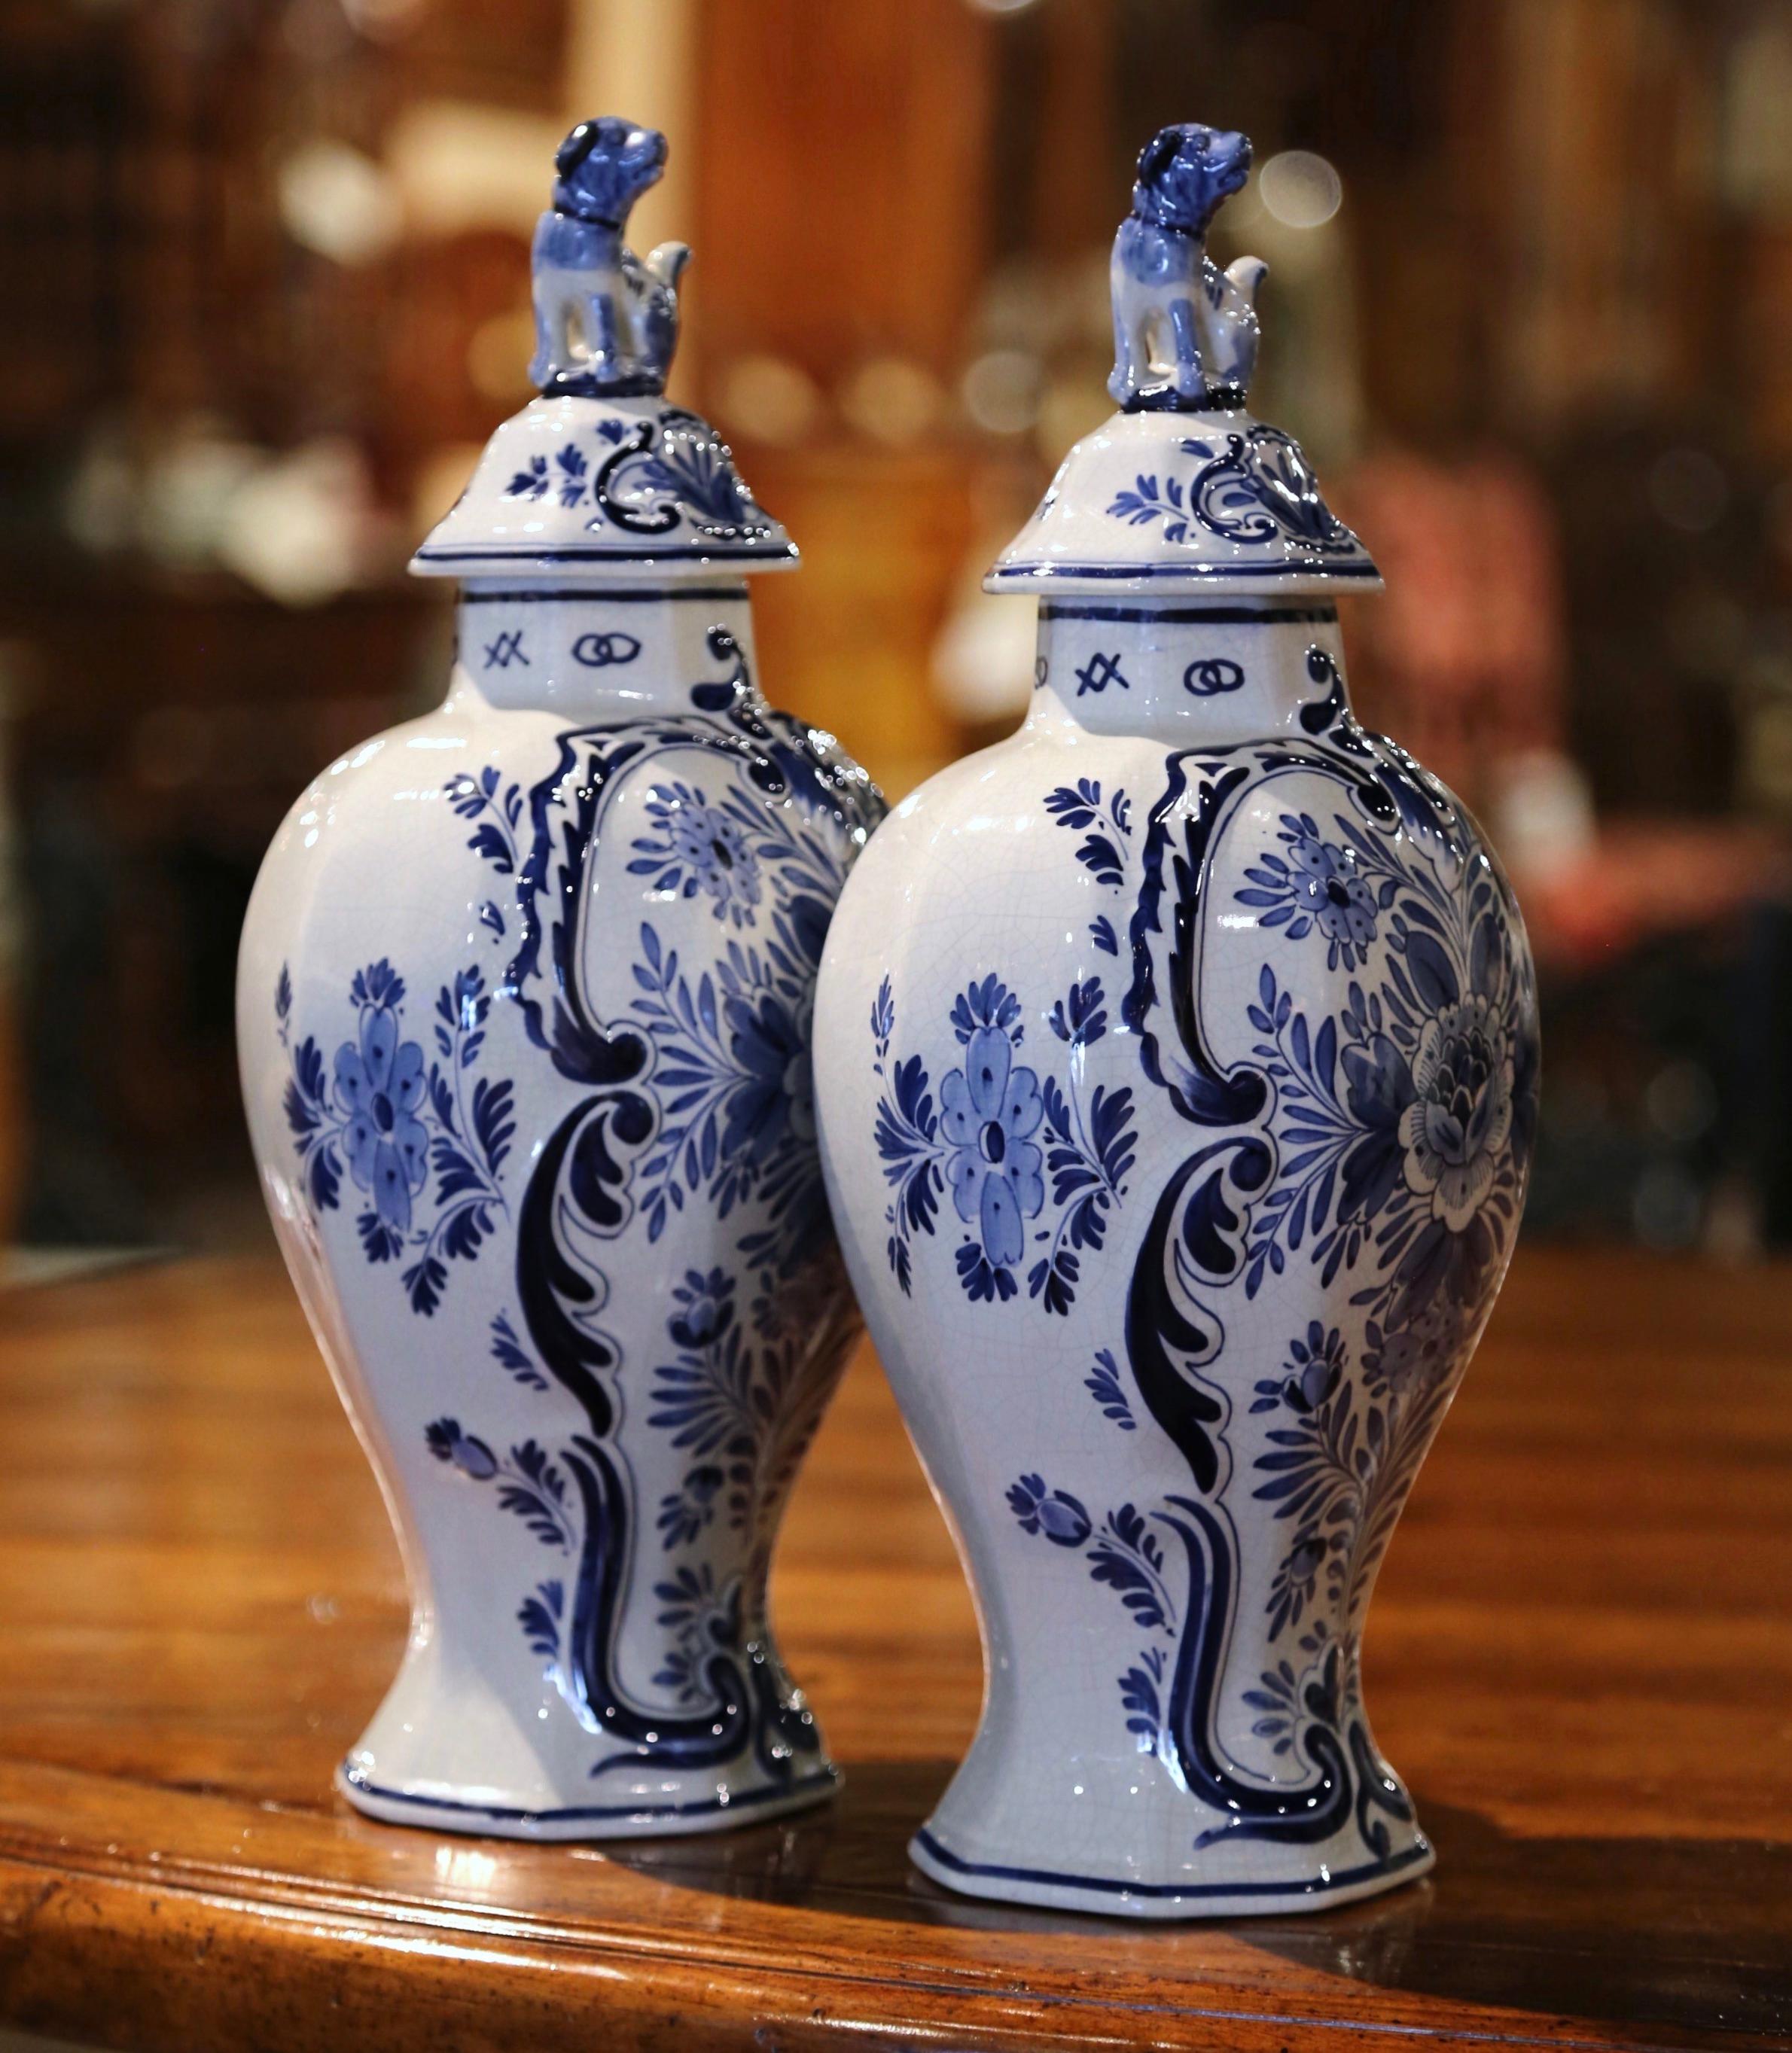 These porcelain ginger jars with lid were created in Holland, circa 1950. Both vases feature a hand painted center medallion decorated with floral and foliage motifs in the traditional blue and white Delft palette. The traditional jars are further